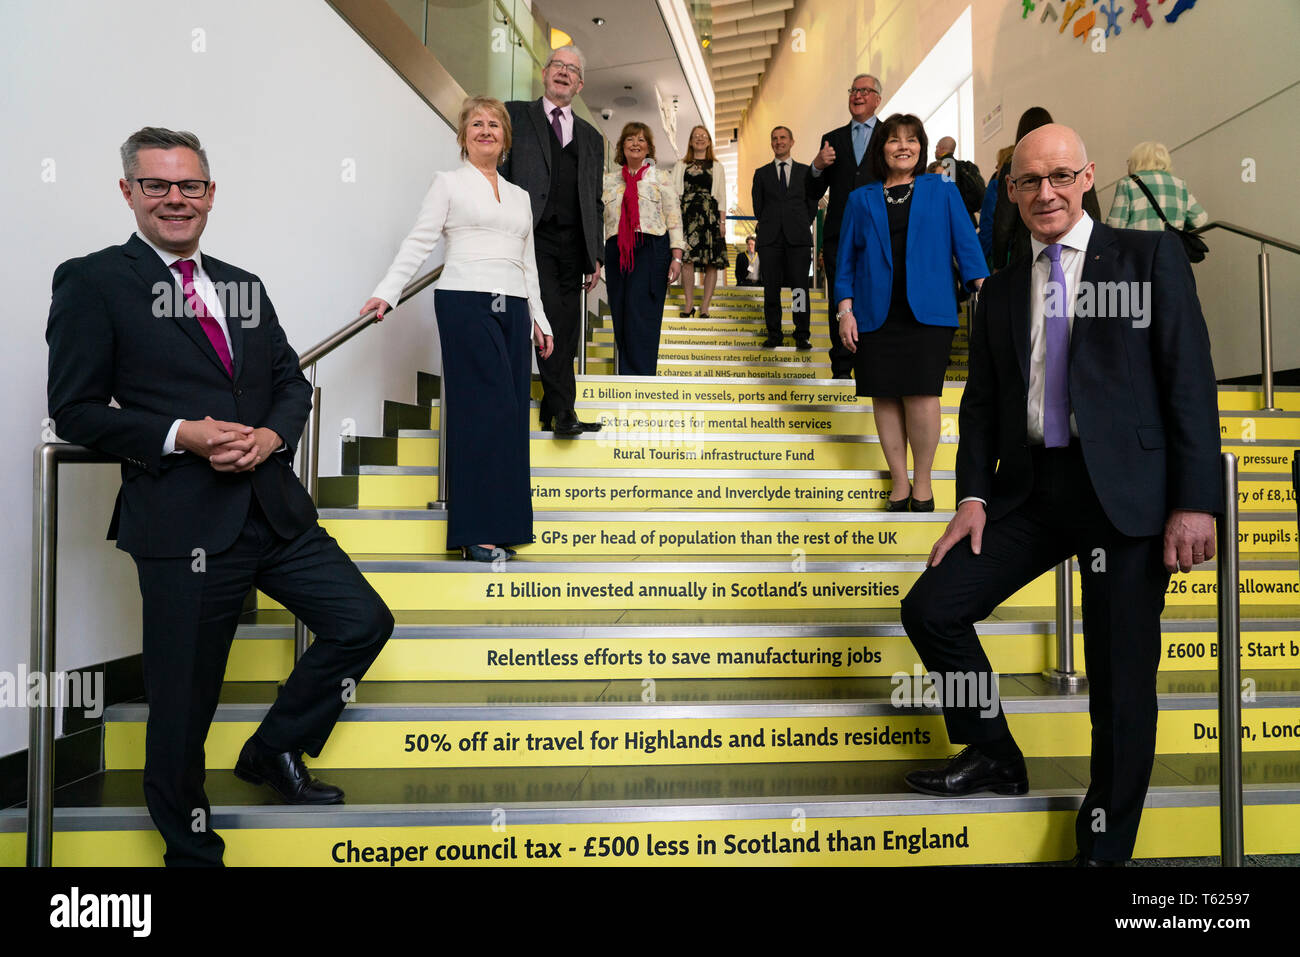 Edinburgh, Scotland, UK. 28 April, 2019. Day 2 of thee SNP ( Scottish National Party) Spring Conference takes place at the EICC ( Edinburgh International Conference Centre) in Edinburgh. Pictured; SNP Government Cabinet Ministers group photo on stairs of the EICC Credit: Iain Masterton/Alamy Live News Stock Photo